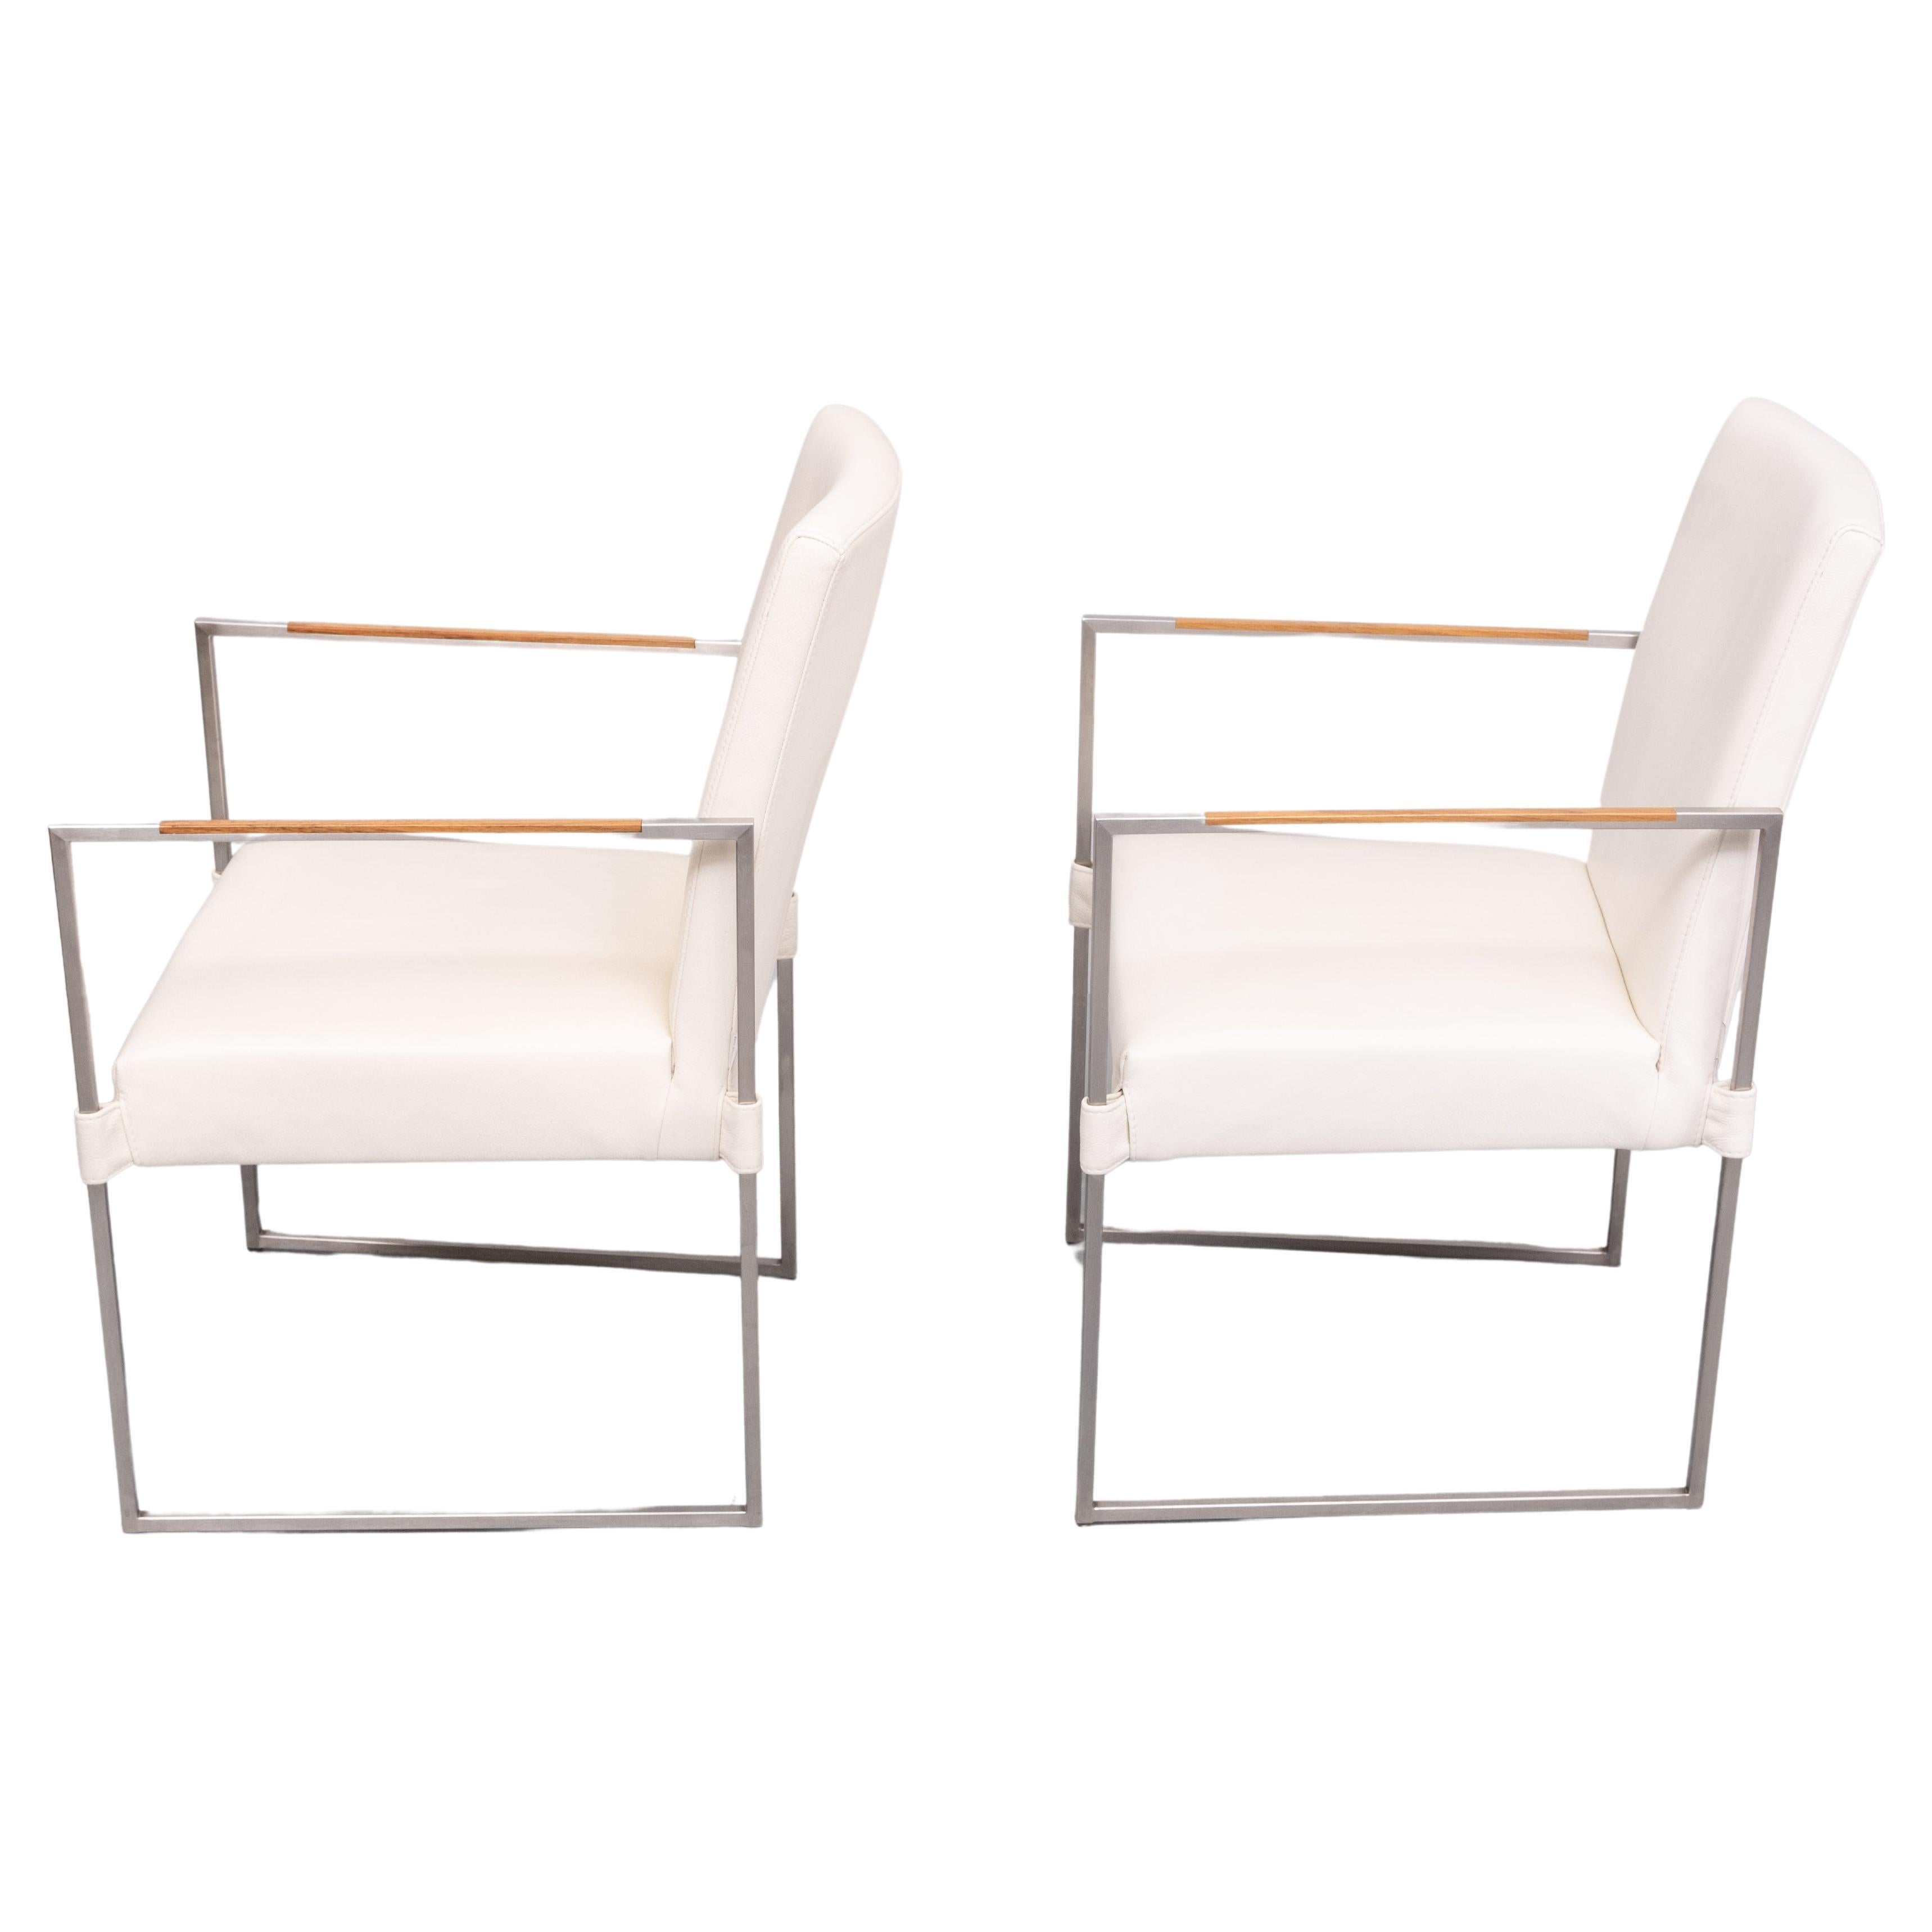 Bert Plantegie  White Leather reclining Armchairs .   In Good Condition For Sale In Den Haag, NL